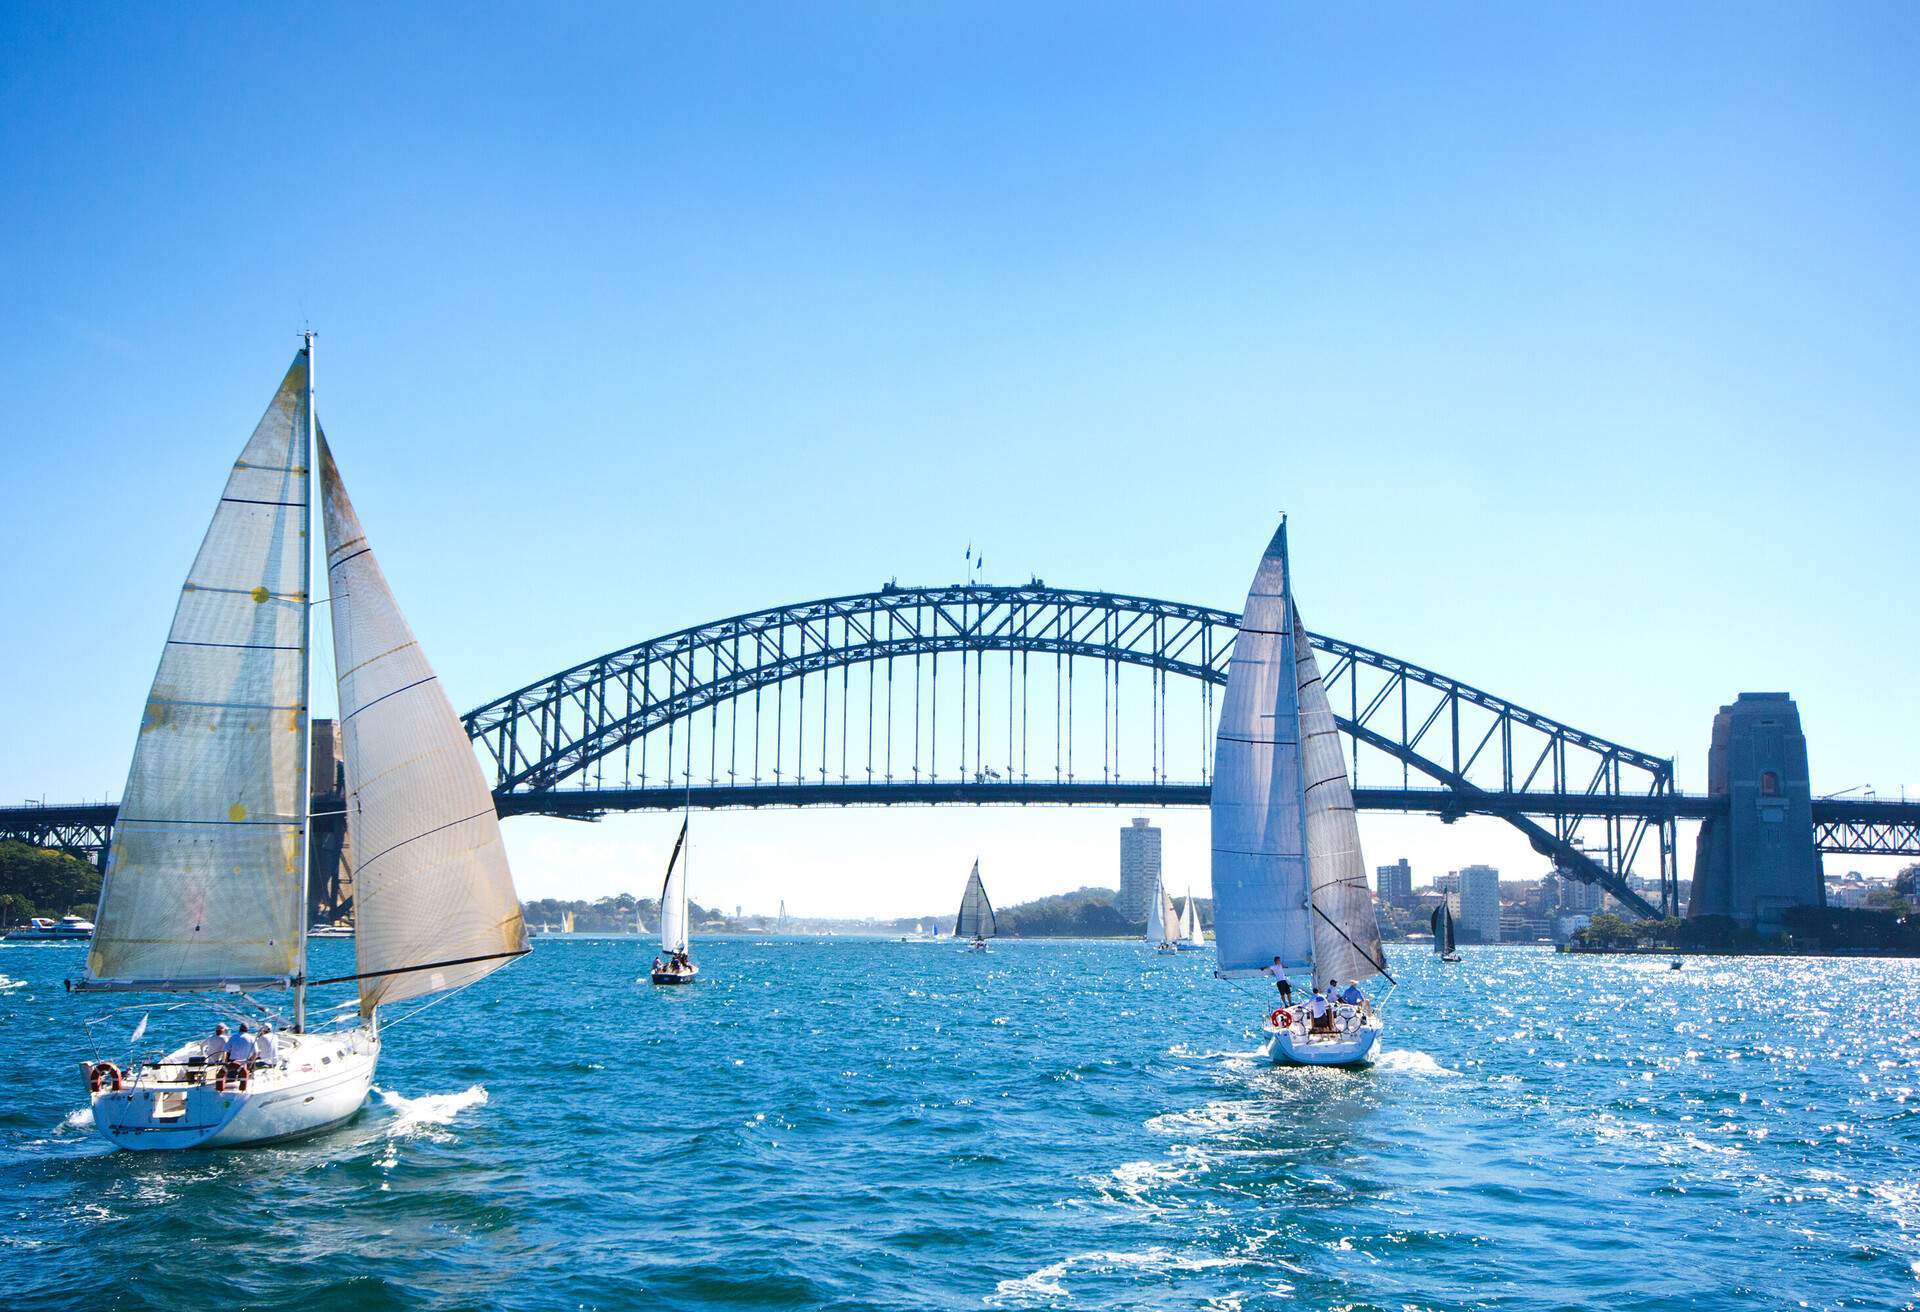 Sailboats on a sunny day at Sydney Harbor, Australia. Iconic Sydney Harbor Bridge in the background. Blue tint applied to enhance the sunny blue sky day.